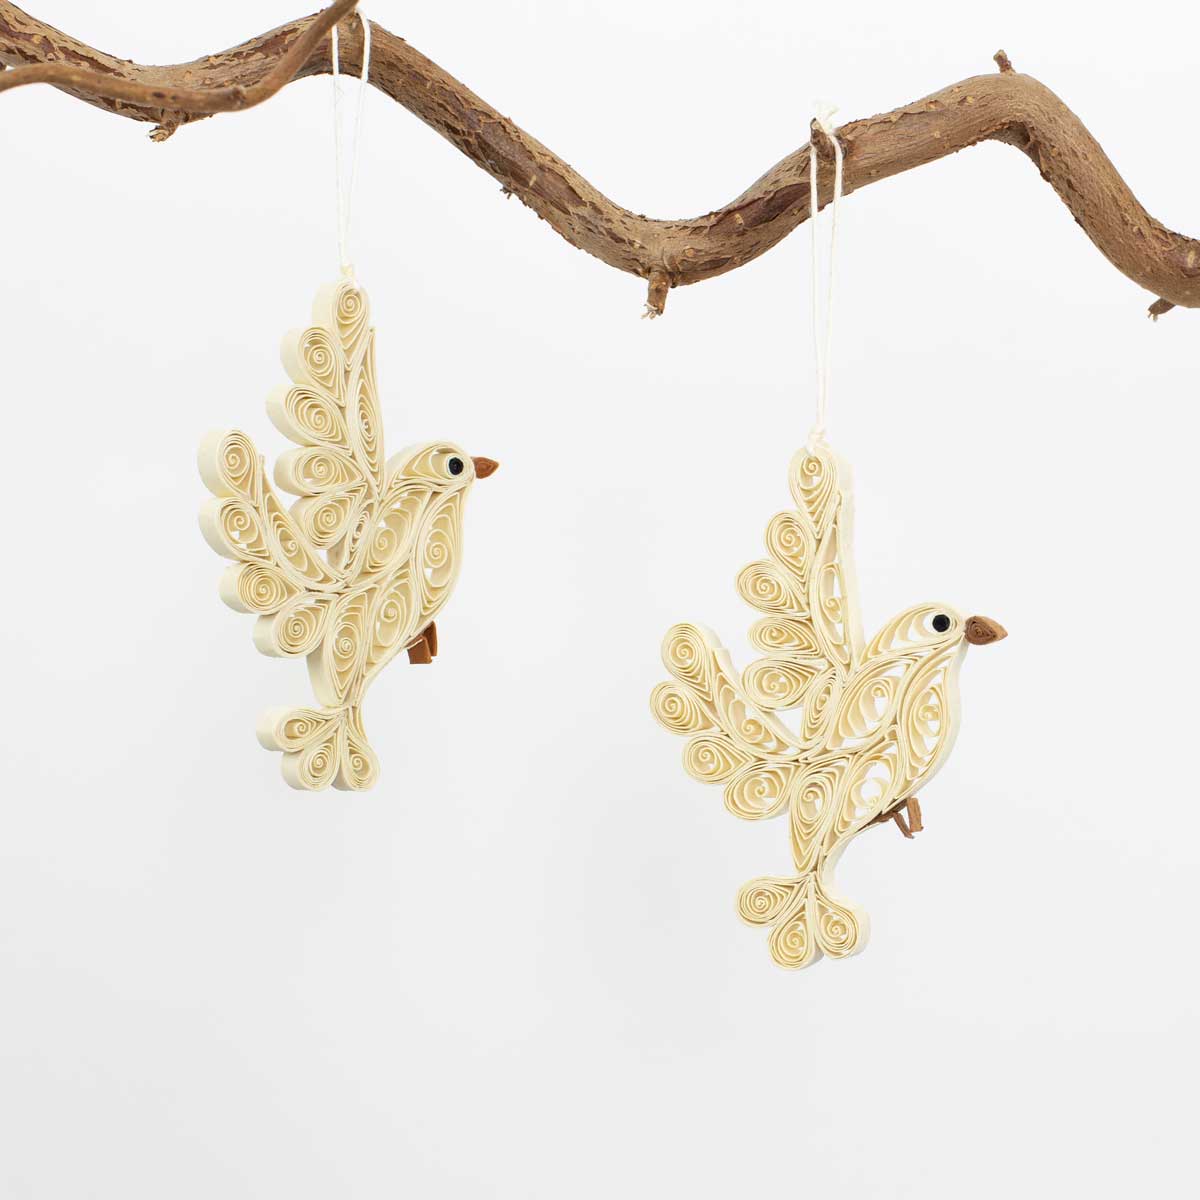 QUILLED DOVE Ornament 2 pack, white